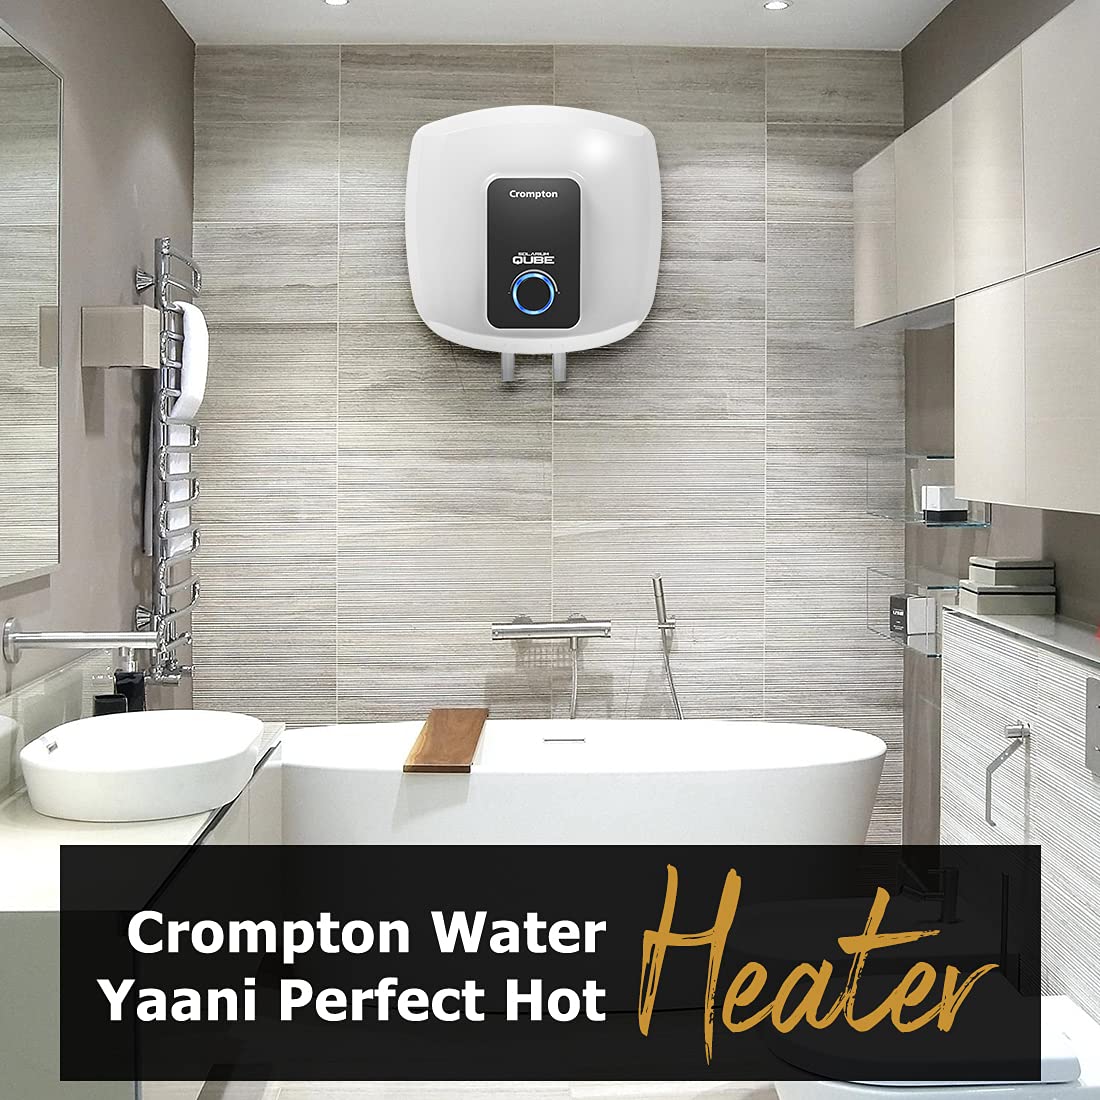 Crompton Solarium Qube 15-L 5 Star Rated Storage Water Heater (Geyser) with Free Installation and Connection Pipes - Mahajan Electronics Online